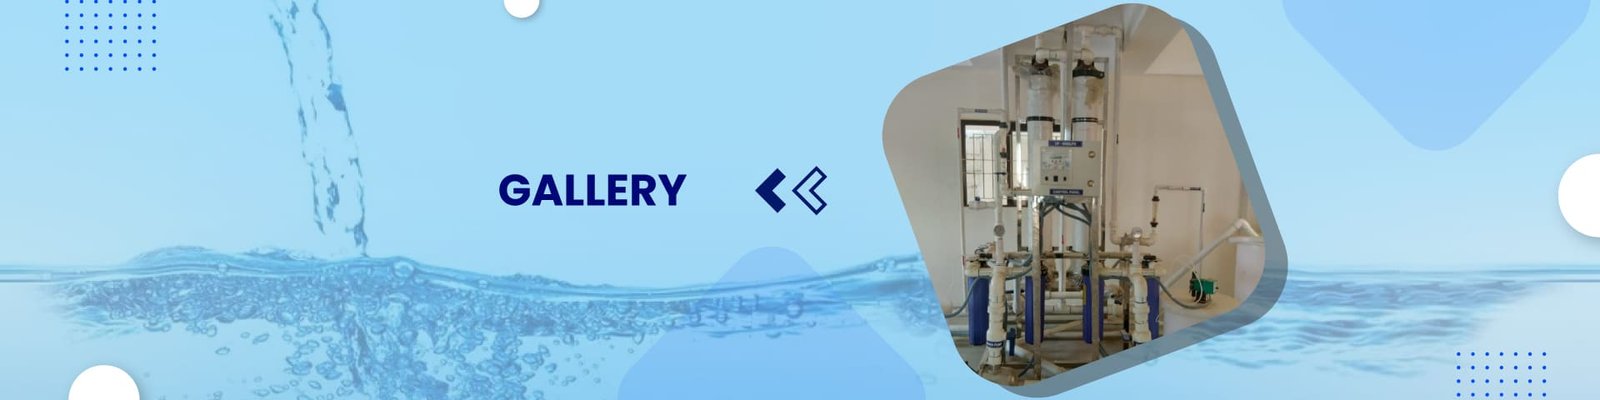 water treatment plants gallery